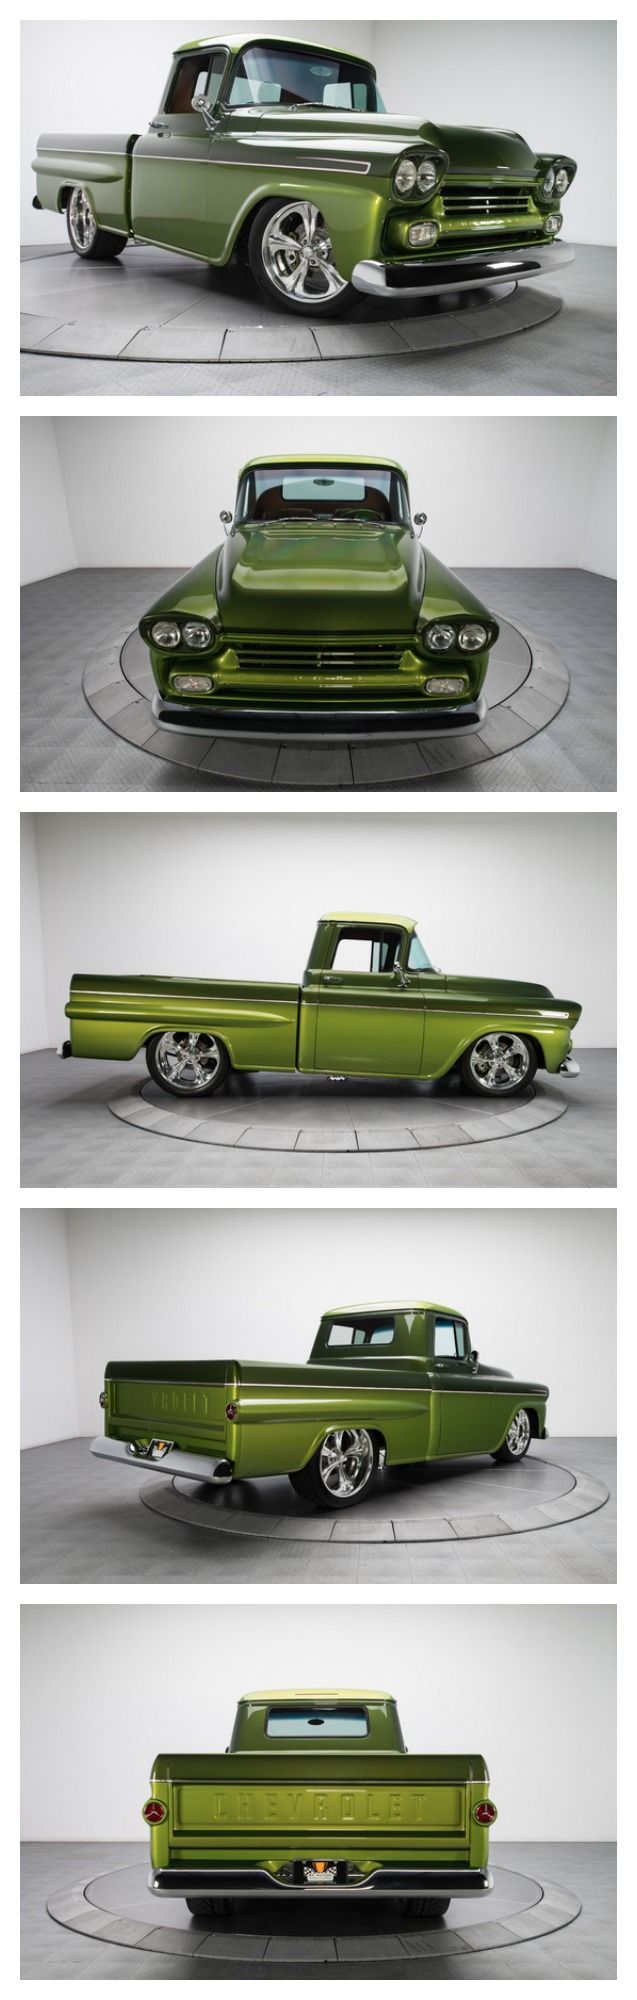 Perpetually cool and visually stunning, this awesome Chevy “Koolant” pickup is a near perfect example of a custom made road